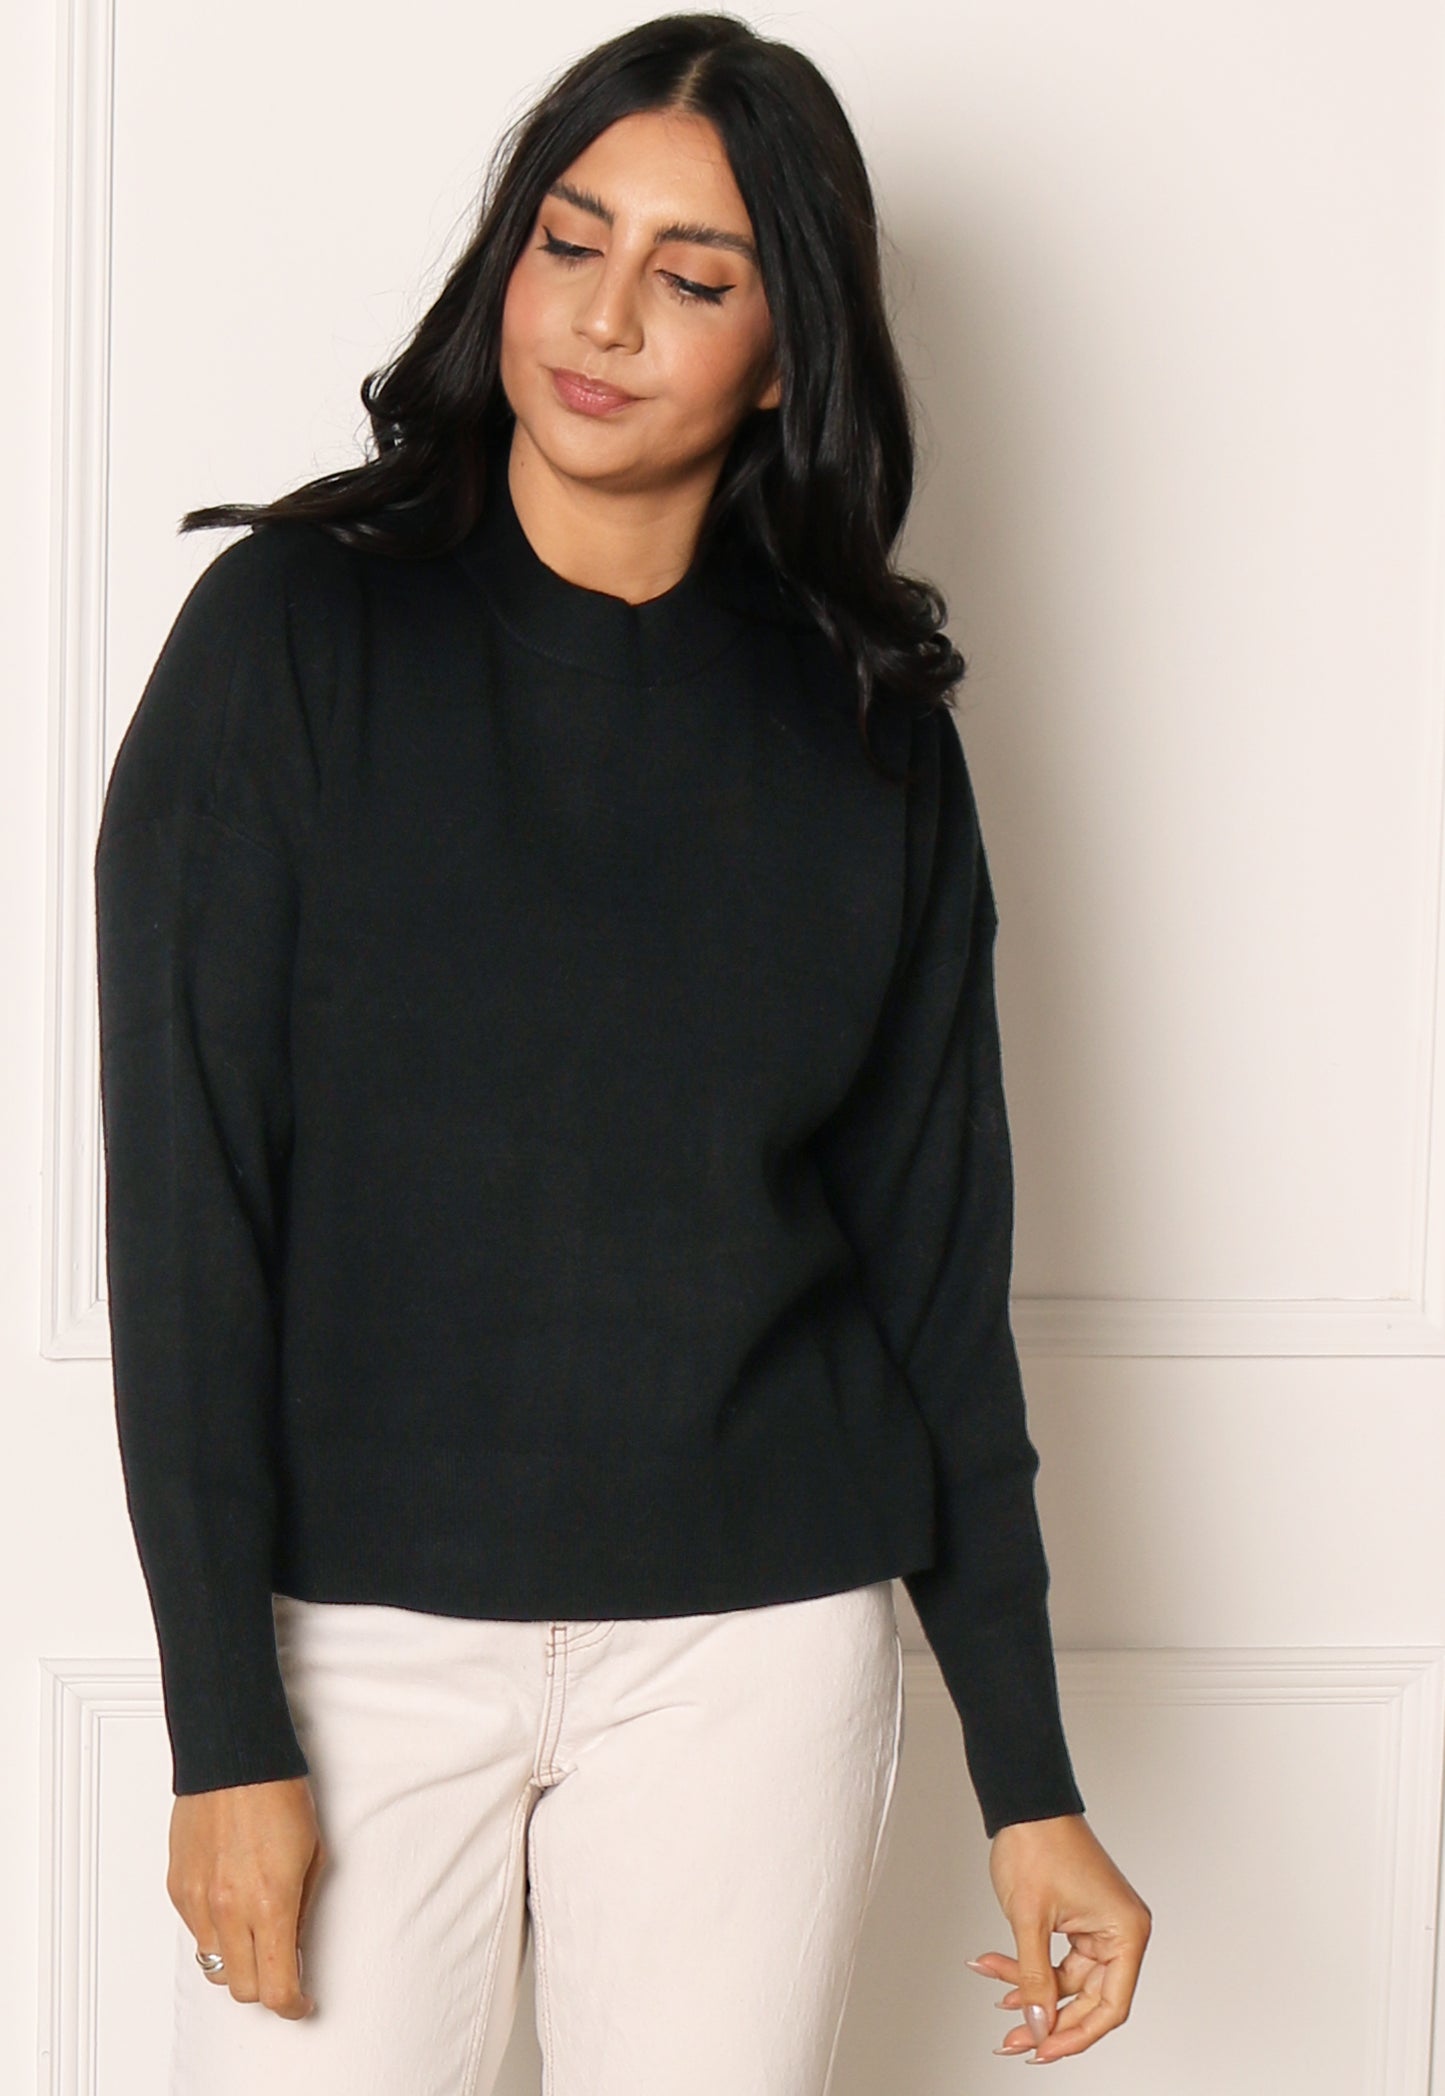 
                  
                    VERO MODA Gold Soft Knit Jumper in Black - One Nation Clothing
                  
                